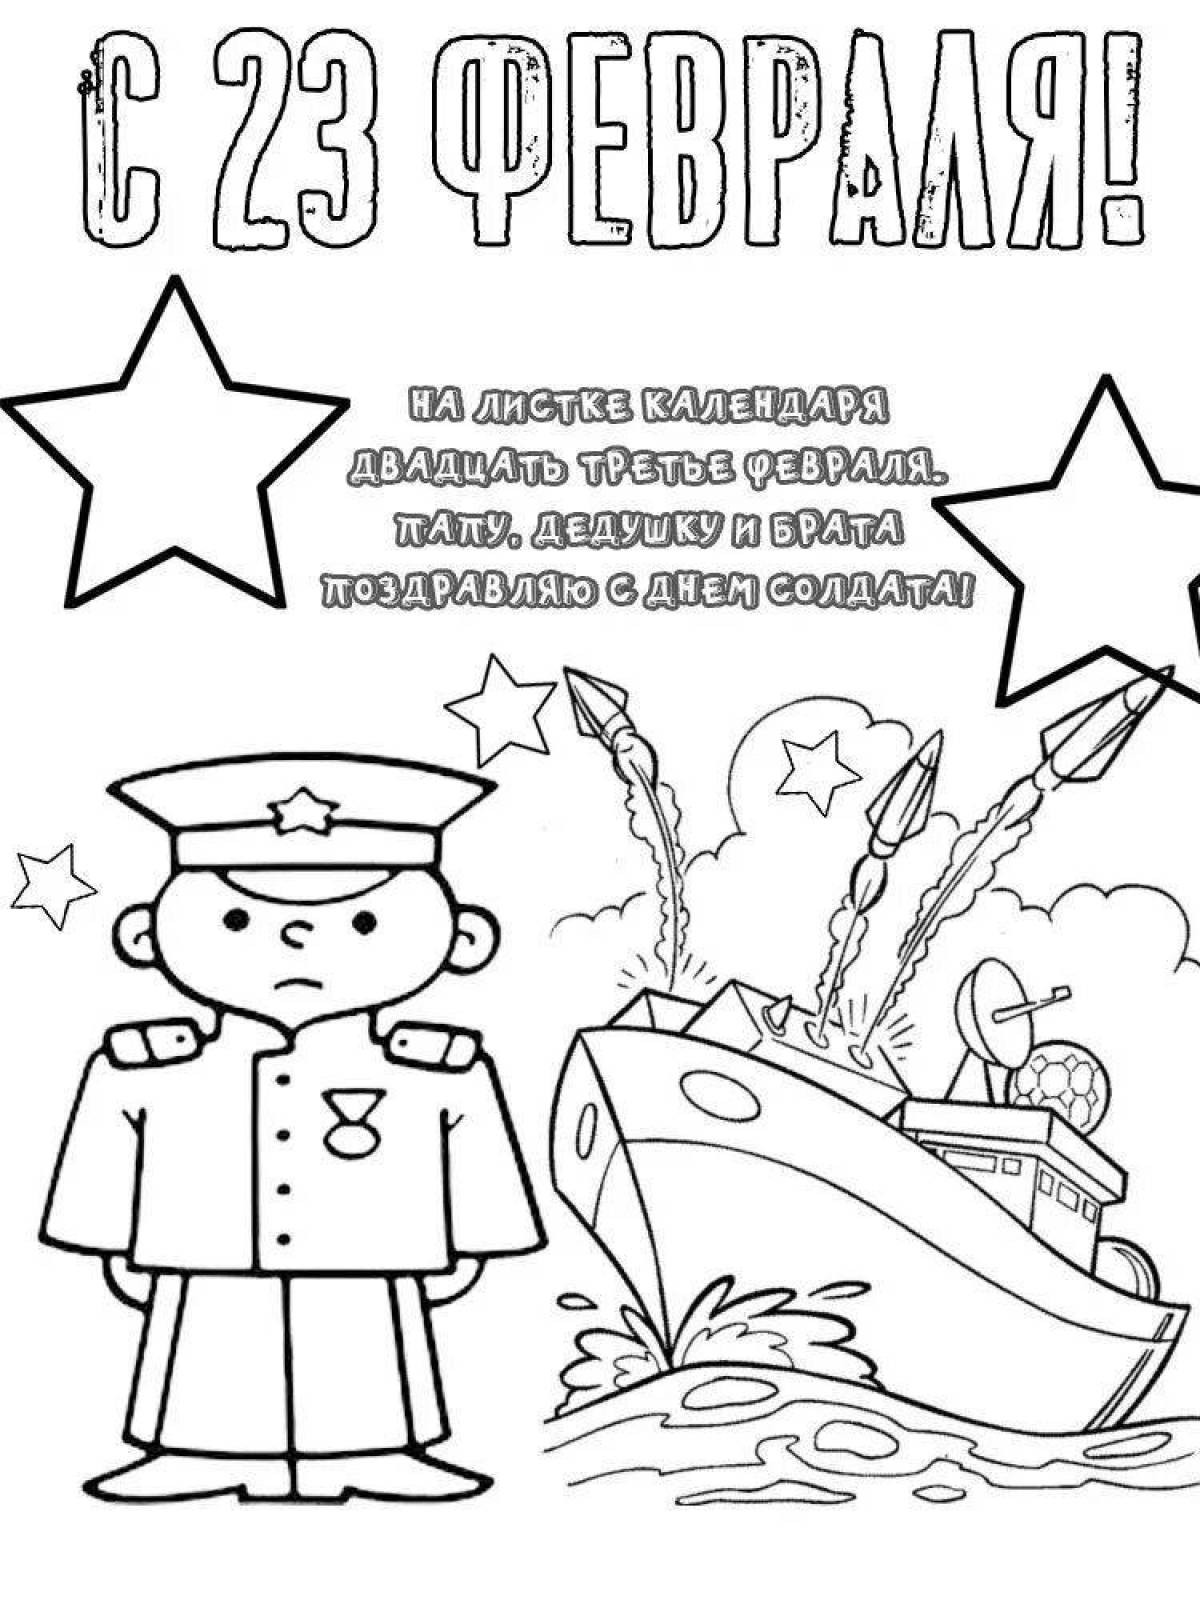 Fun coloring book for older group